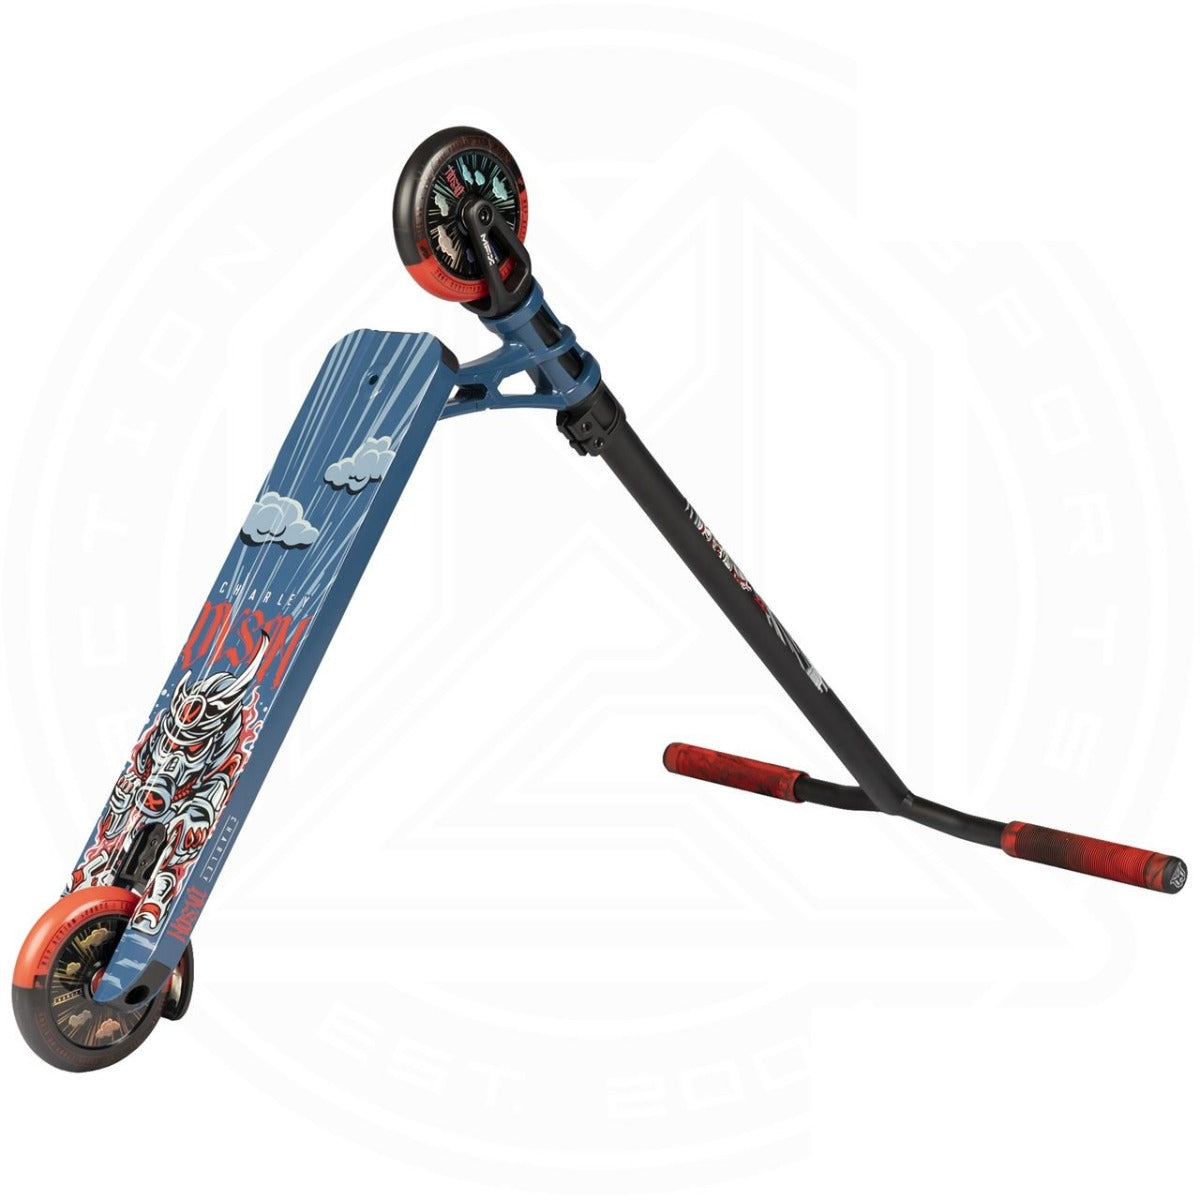 Madd Gear MGP MGX Charley Dyson Signature Complete Stunt Scooter - Slate Blue - Graphic